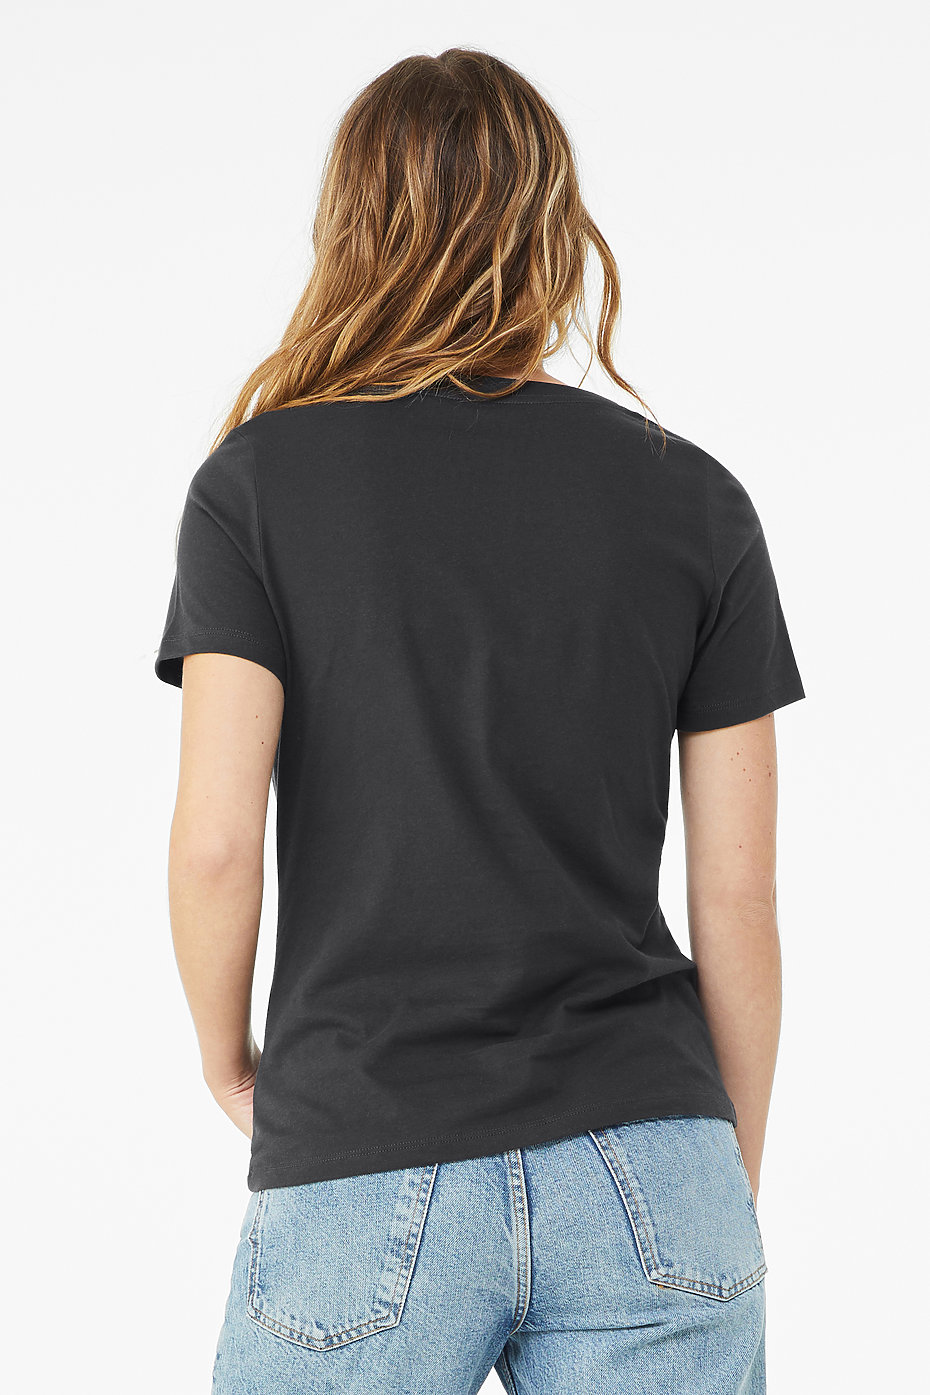 Los Angeles Apparel | Shirt for Women in Black, Size 2XL